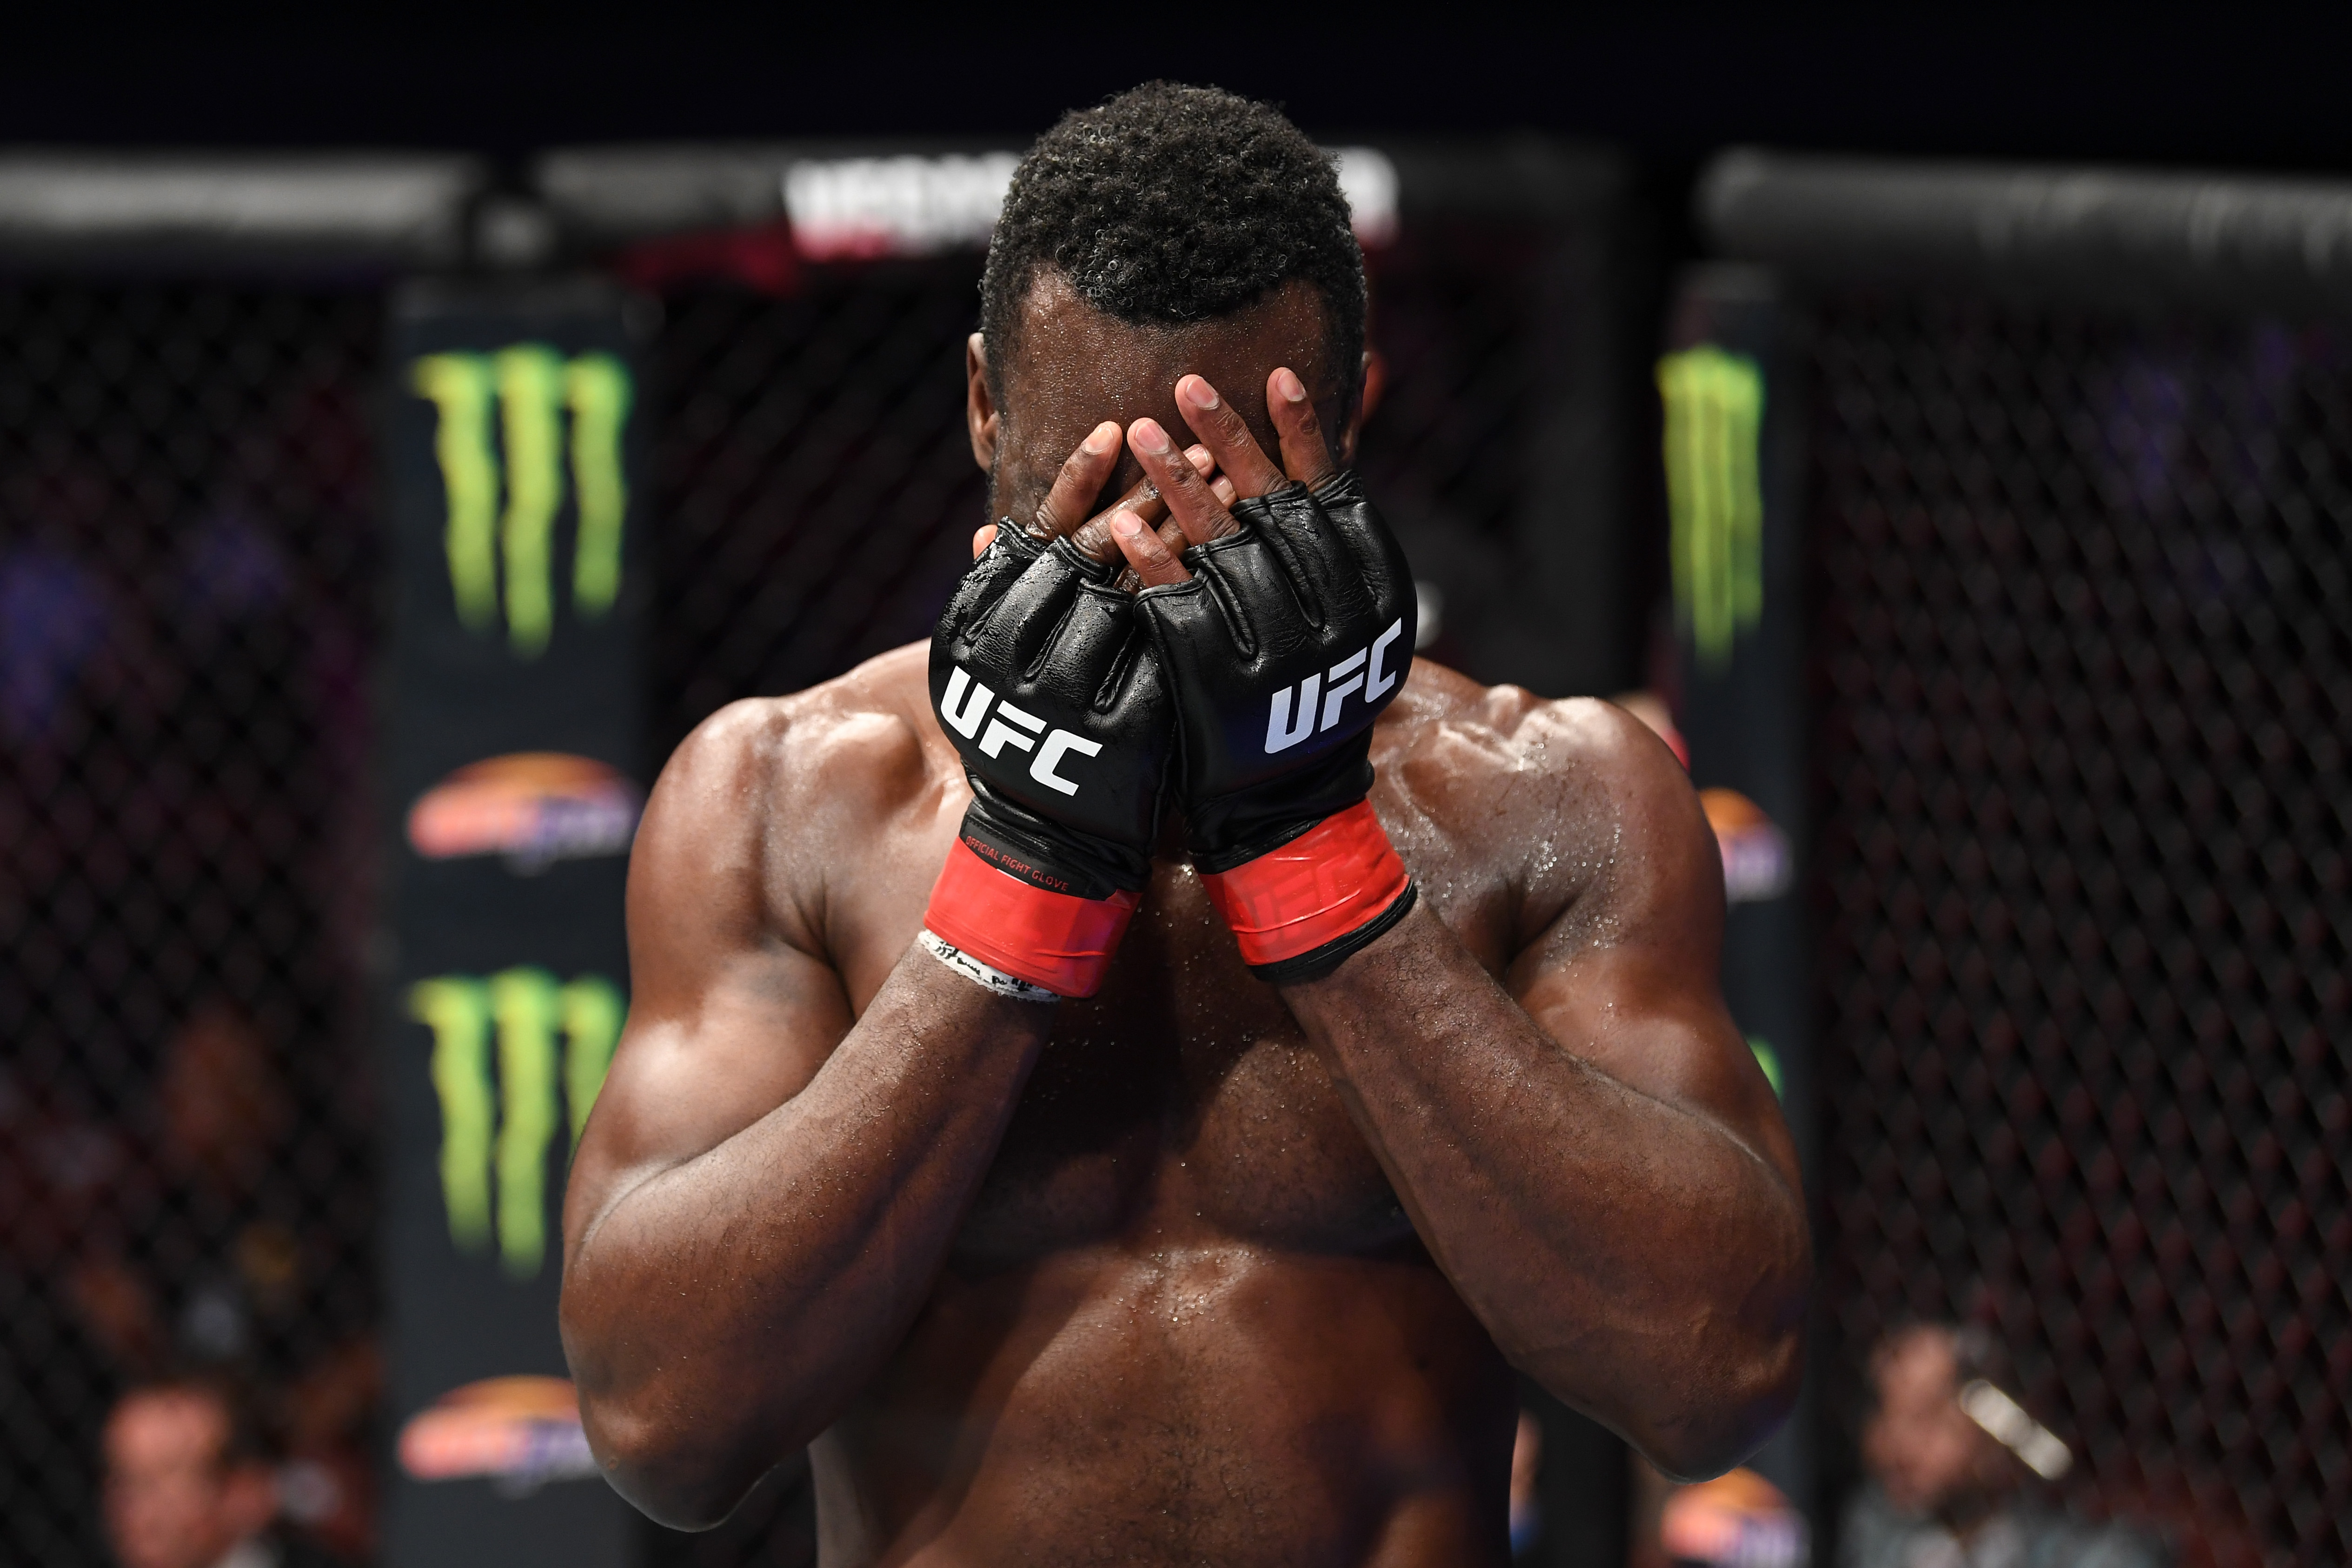 Sean Strickland is sizably favored over Uriah Hall in the UFC Vegas 33 main event